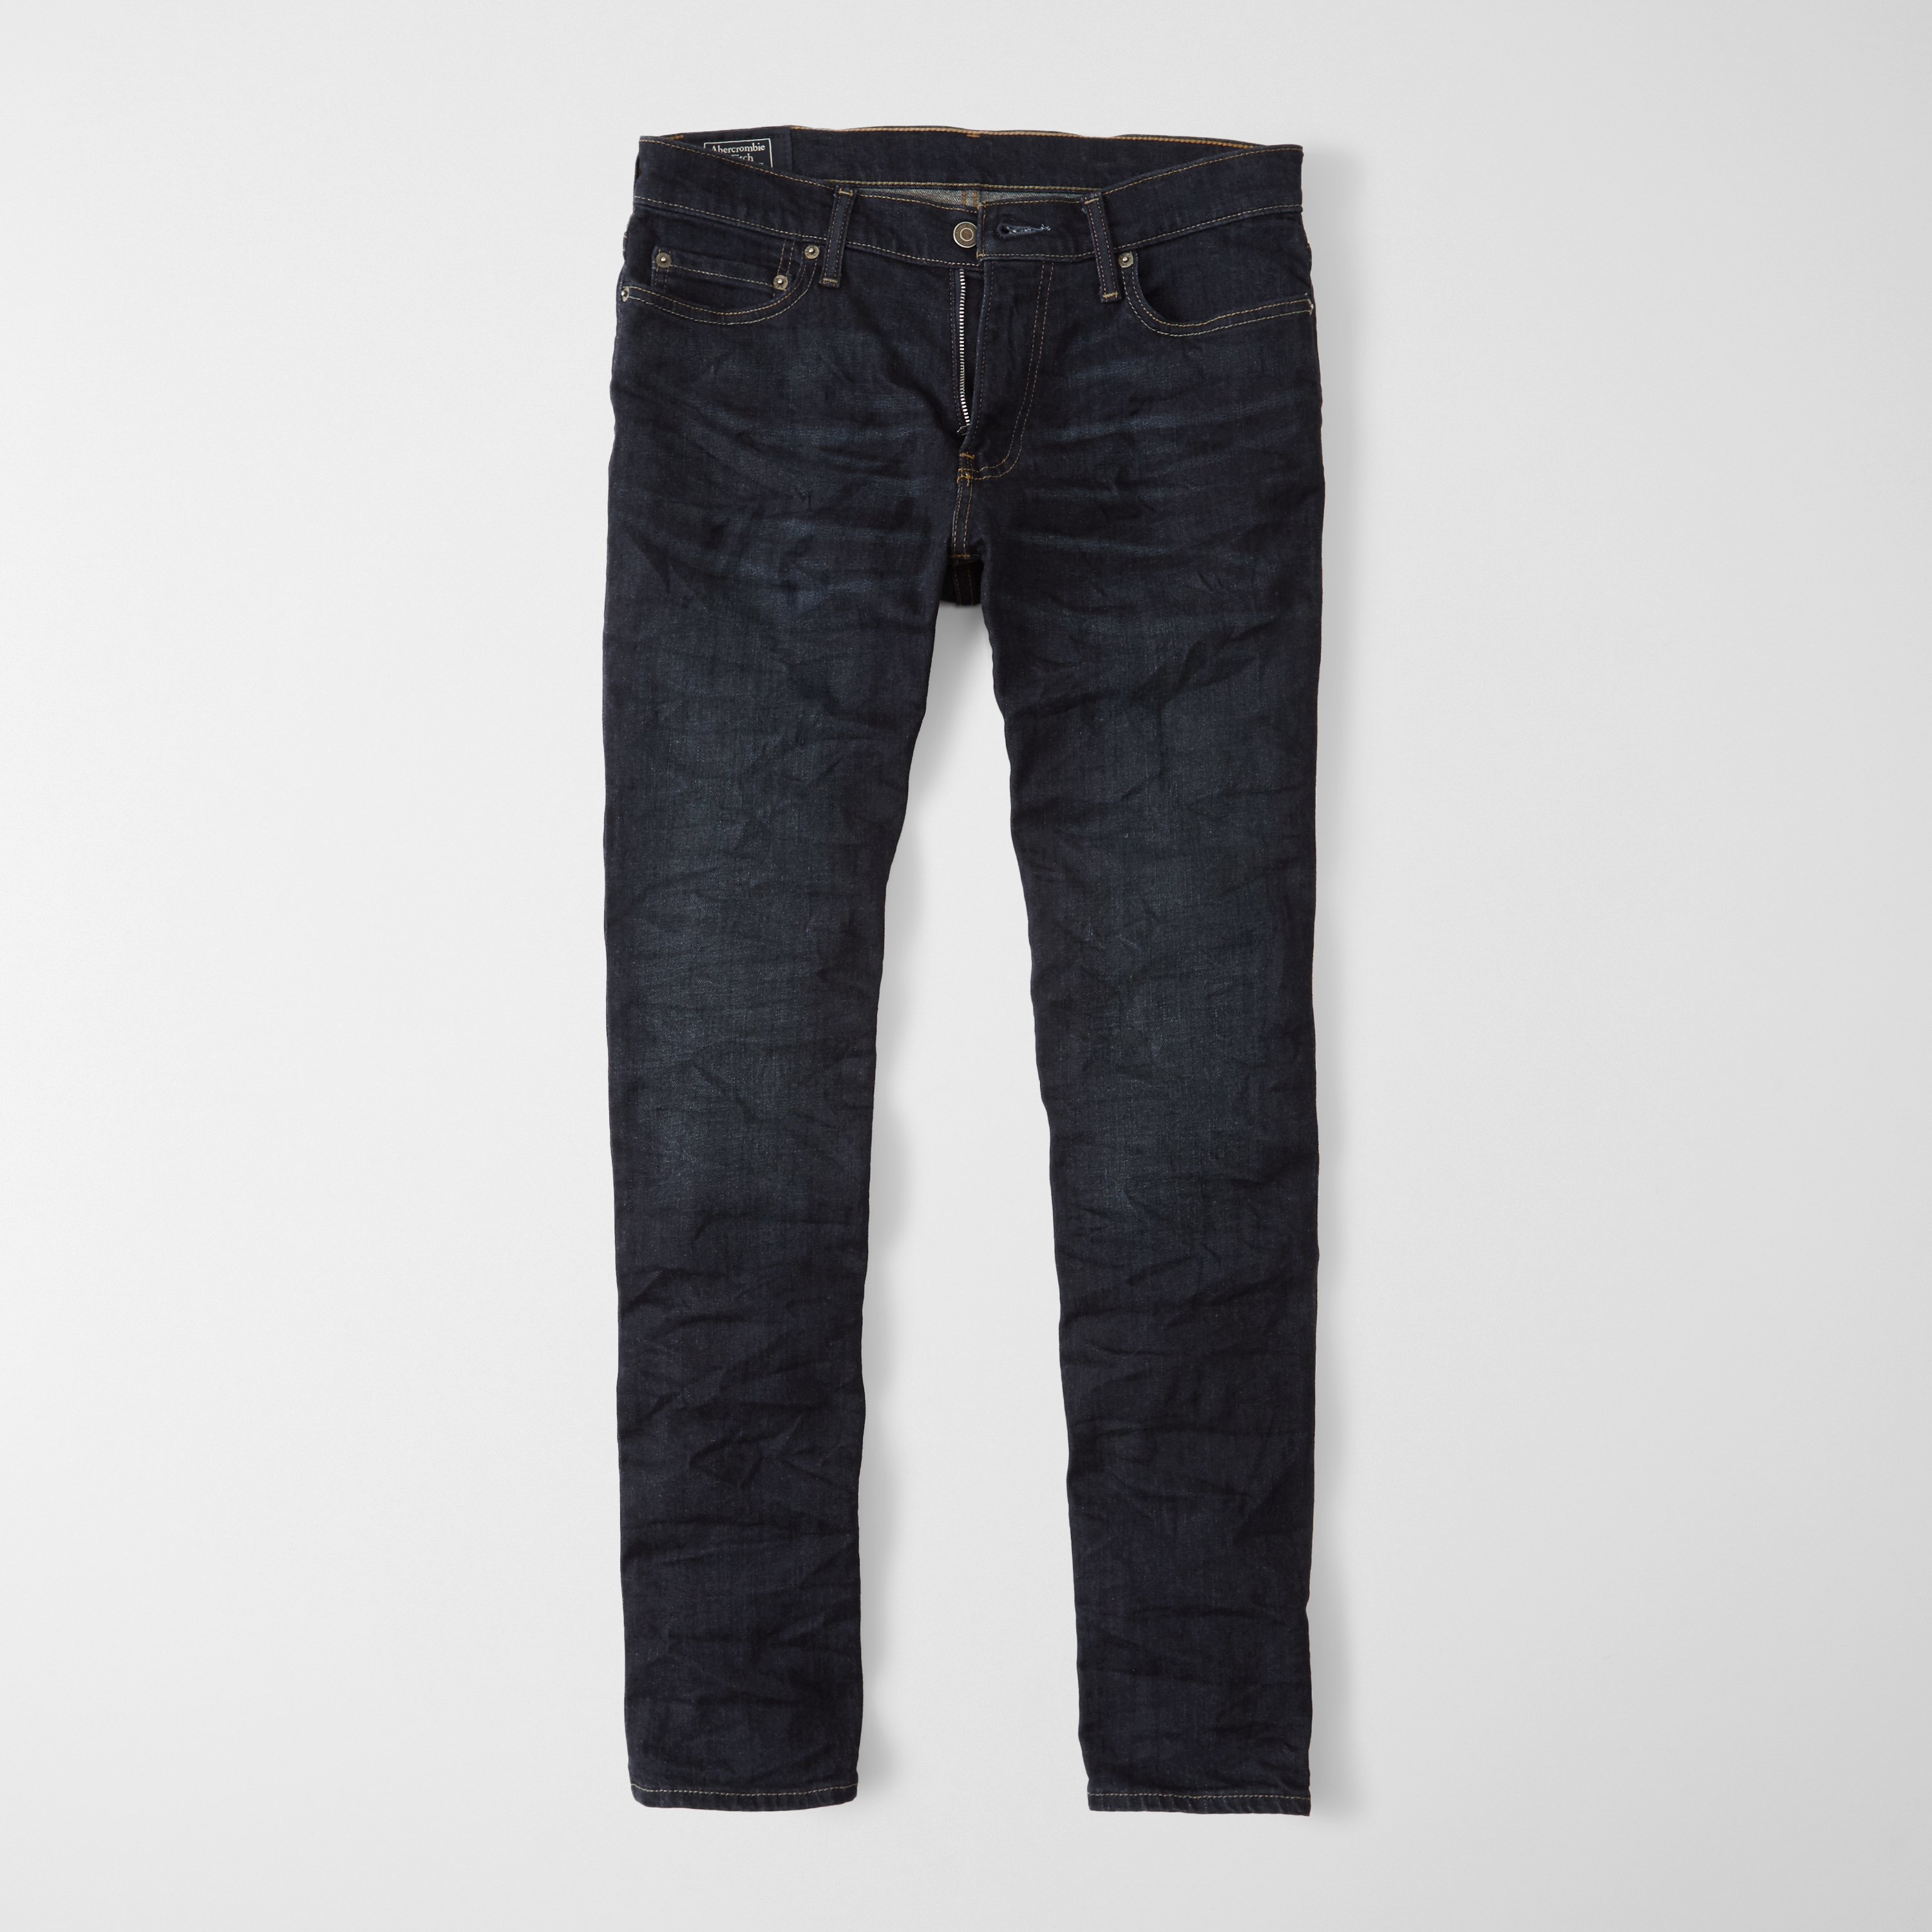 abercrombie & fitch slim straight jeans